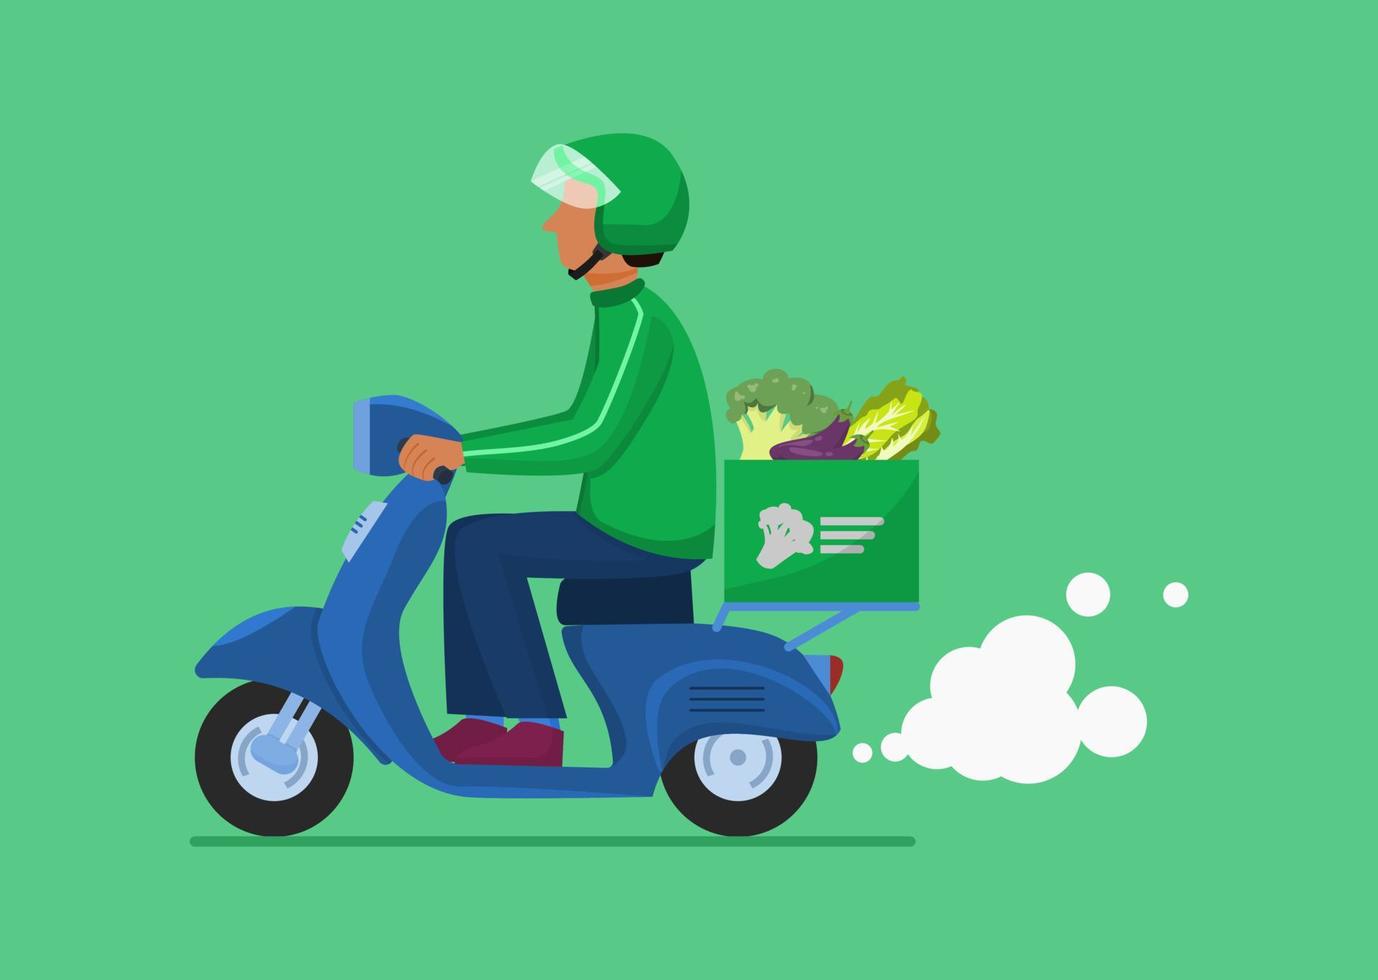 vegetable delivery motorcycle. courier rides motorcycle delivering vegetables to customer vector